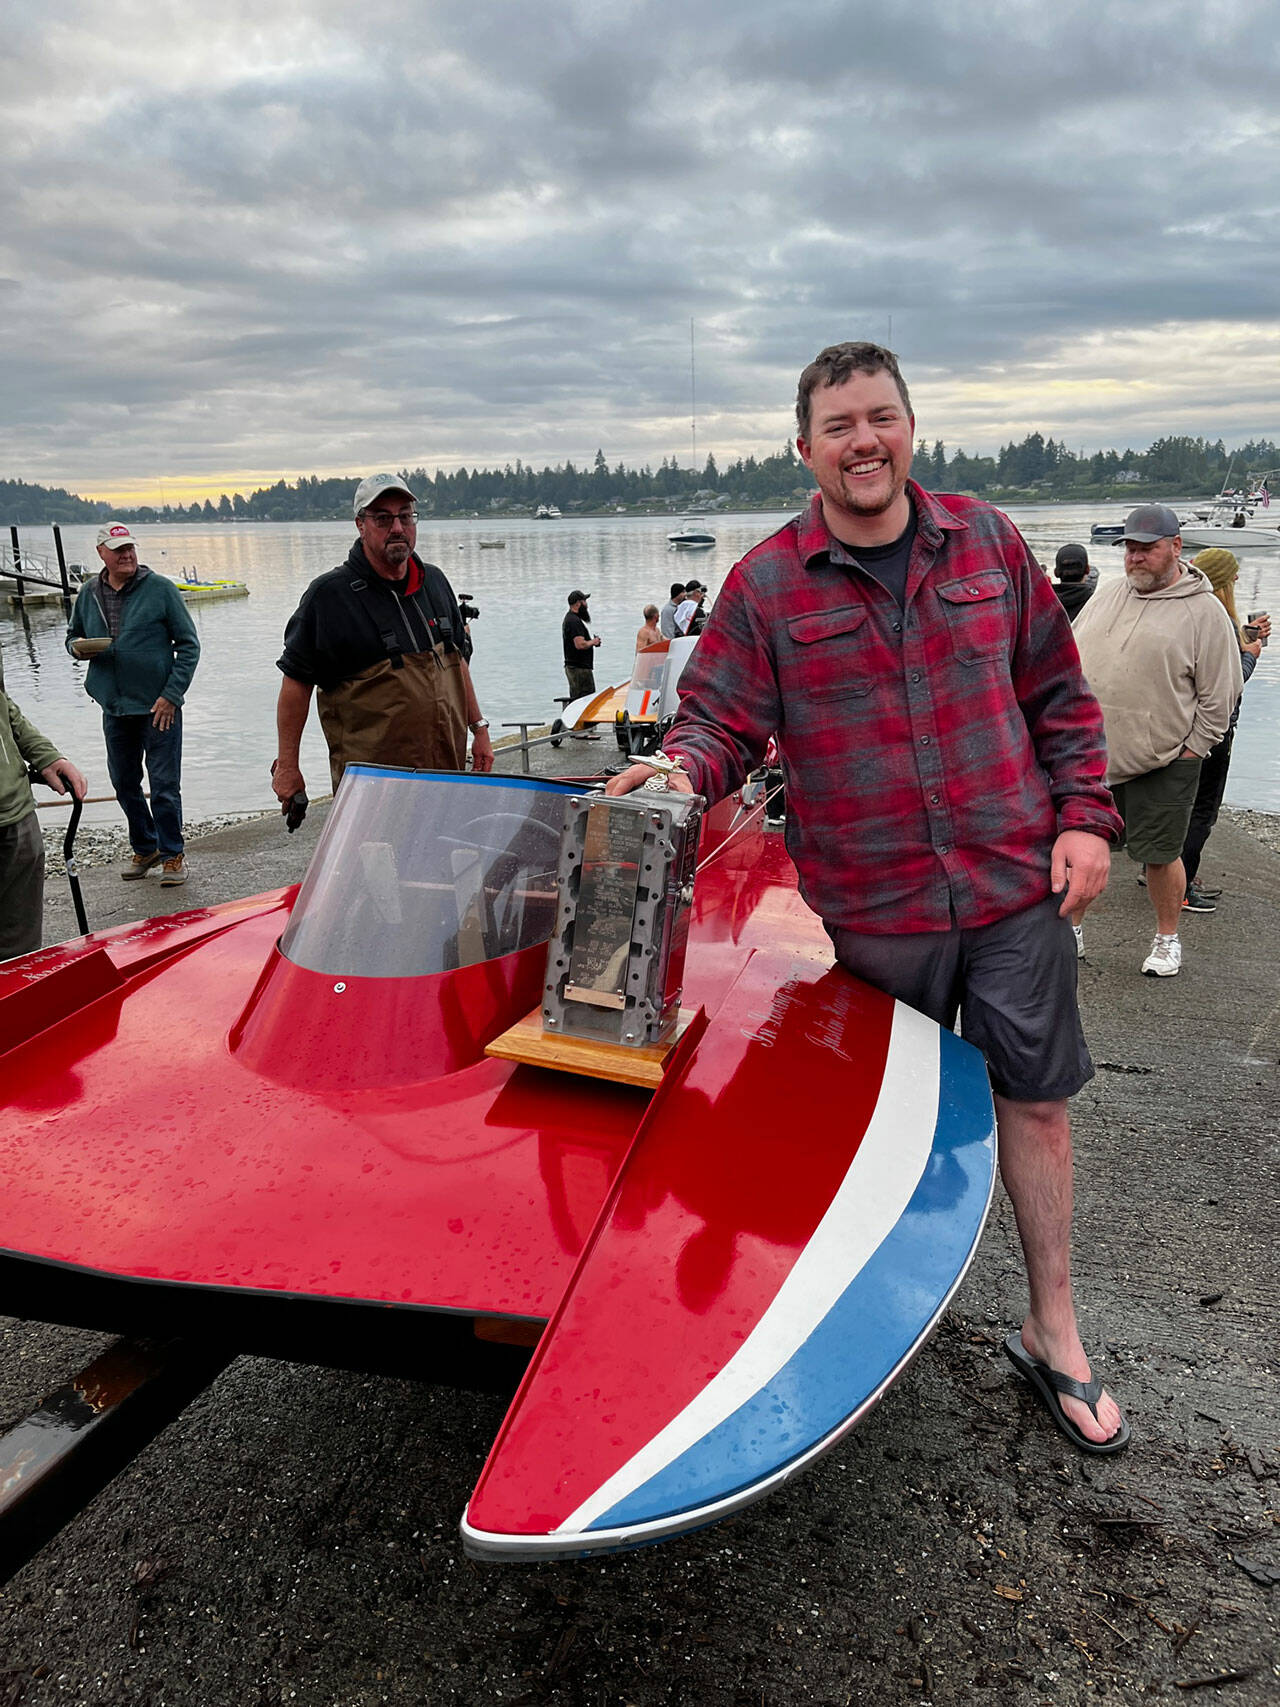 (Brian Brenno Photo) On July 4, the day on Vashon began with Evan Hill’s win in the island’s hydro race and ended with a professional fireworks display over Quartermaster Harbor.